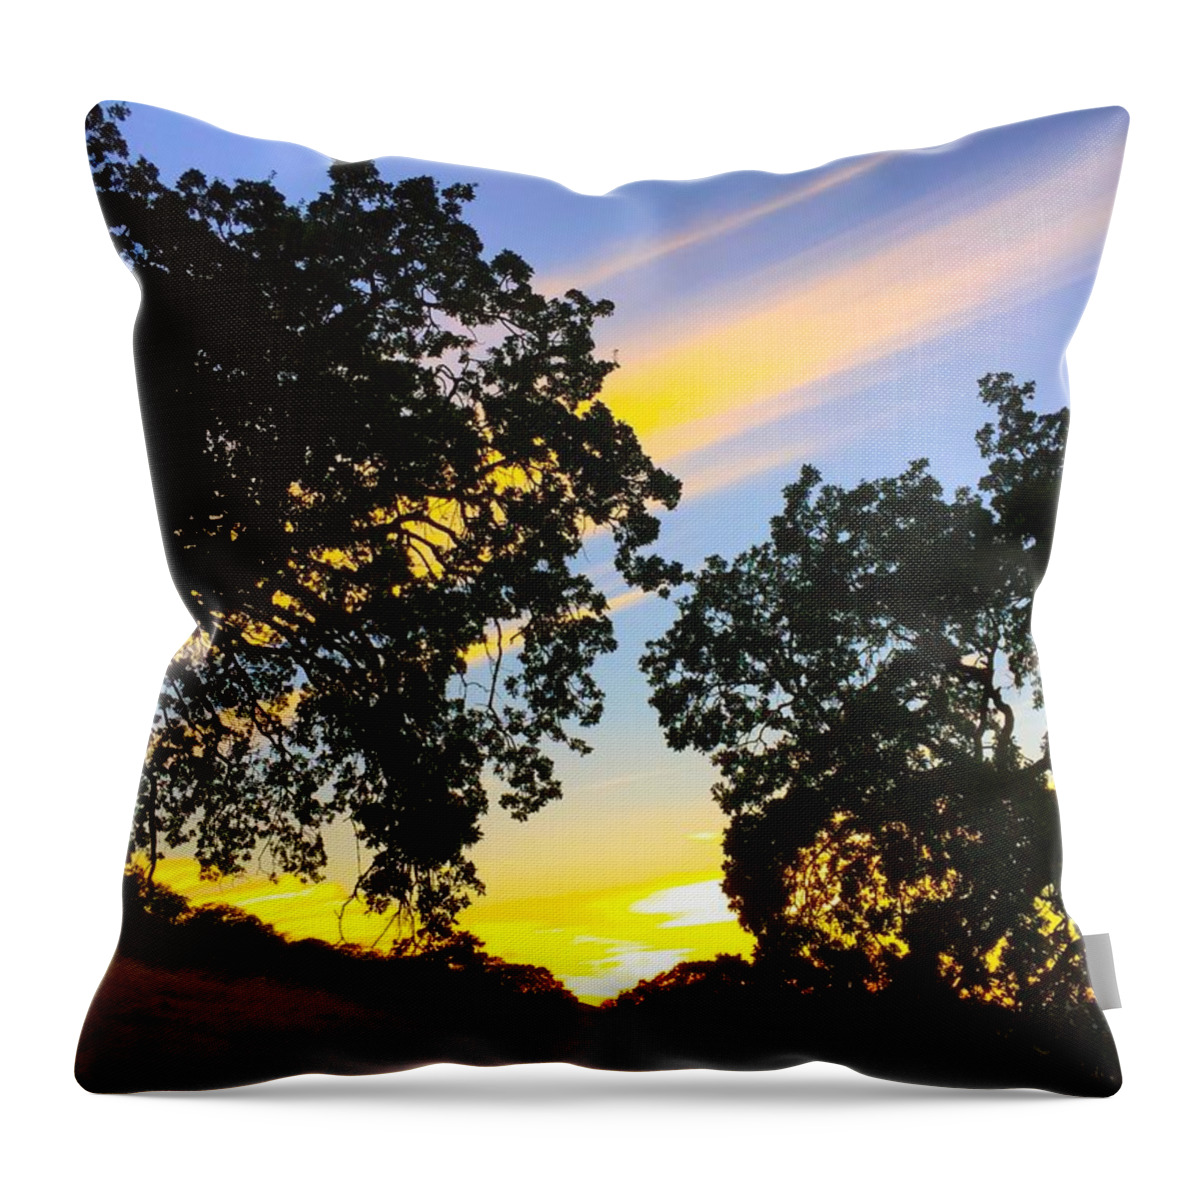 Sunset Throw Pillow featuring the photograph Magic Hour Sunset by Brad Hodges